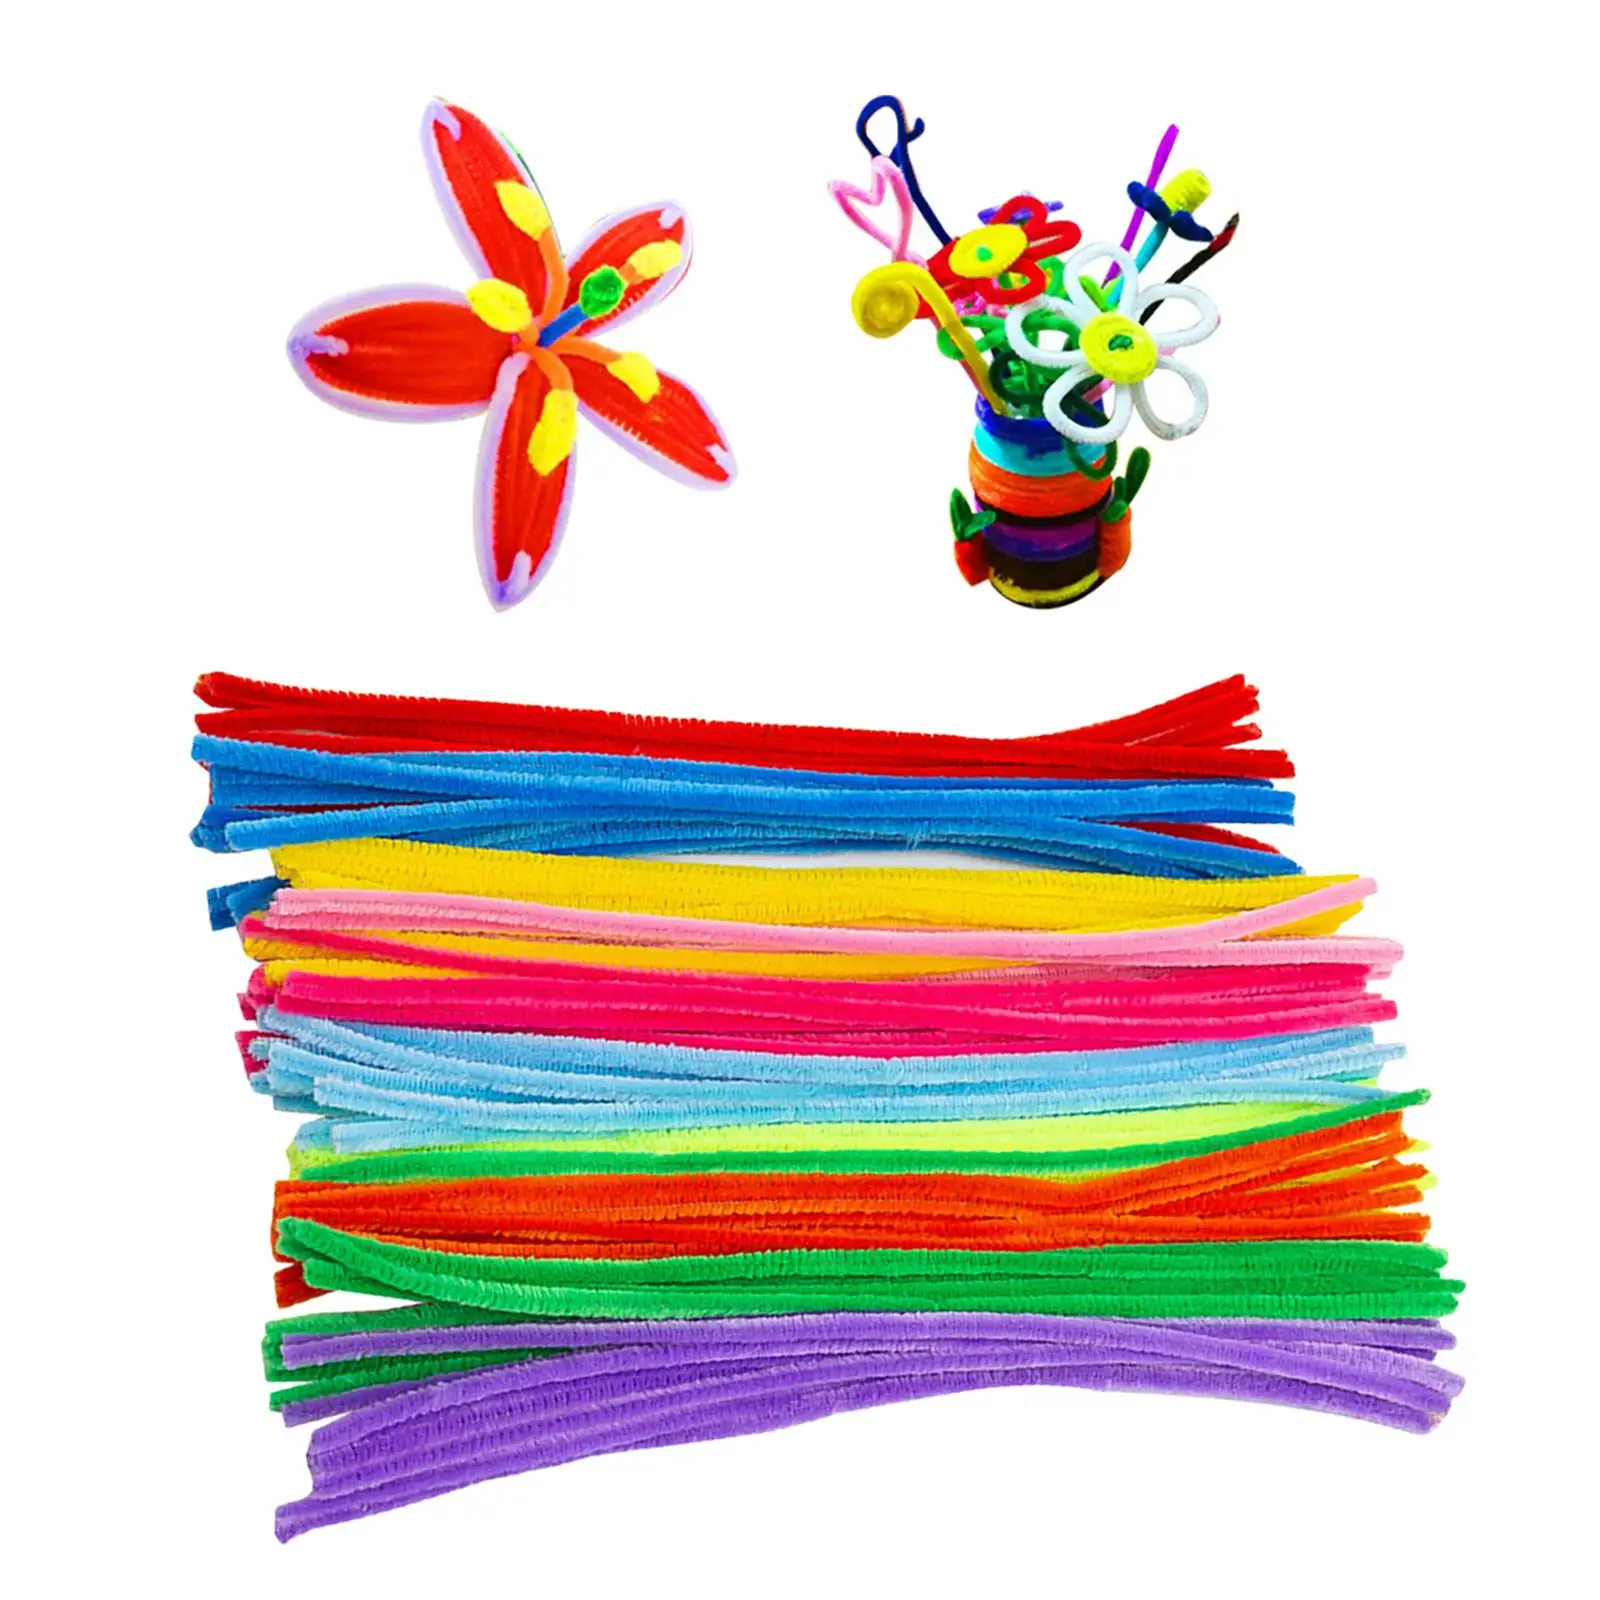 Twisting Bar Decoration DIY Project Crafting Materials Handmade Assorted Colored Gifts Art Crafts Supplies for Preschool Parties